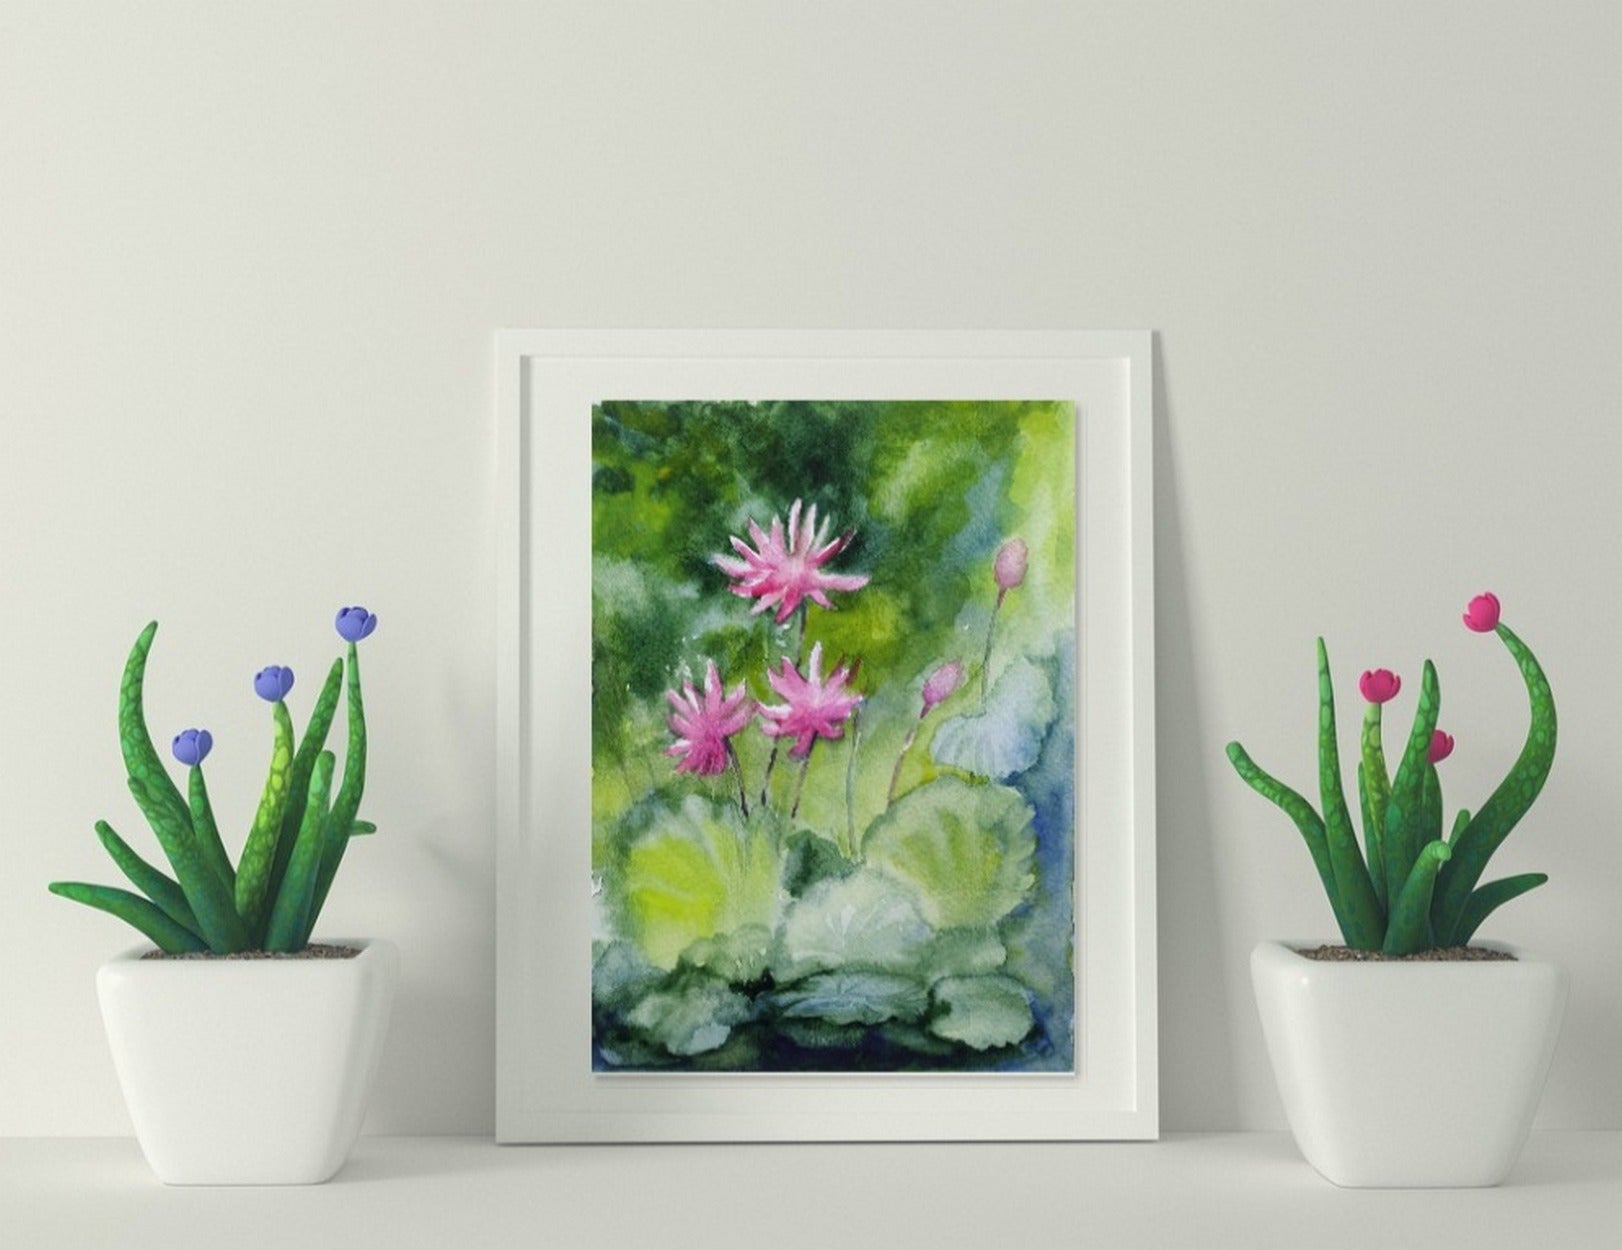 In a virtual room setting, Pink water lilies, watercolor painting